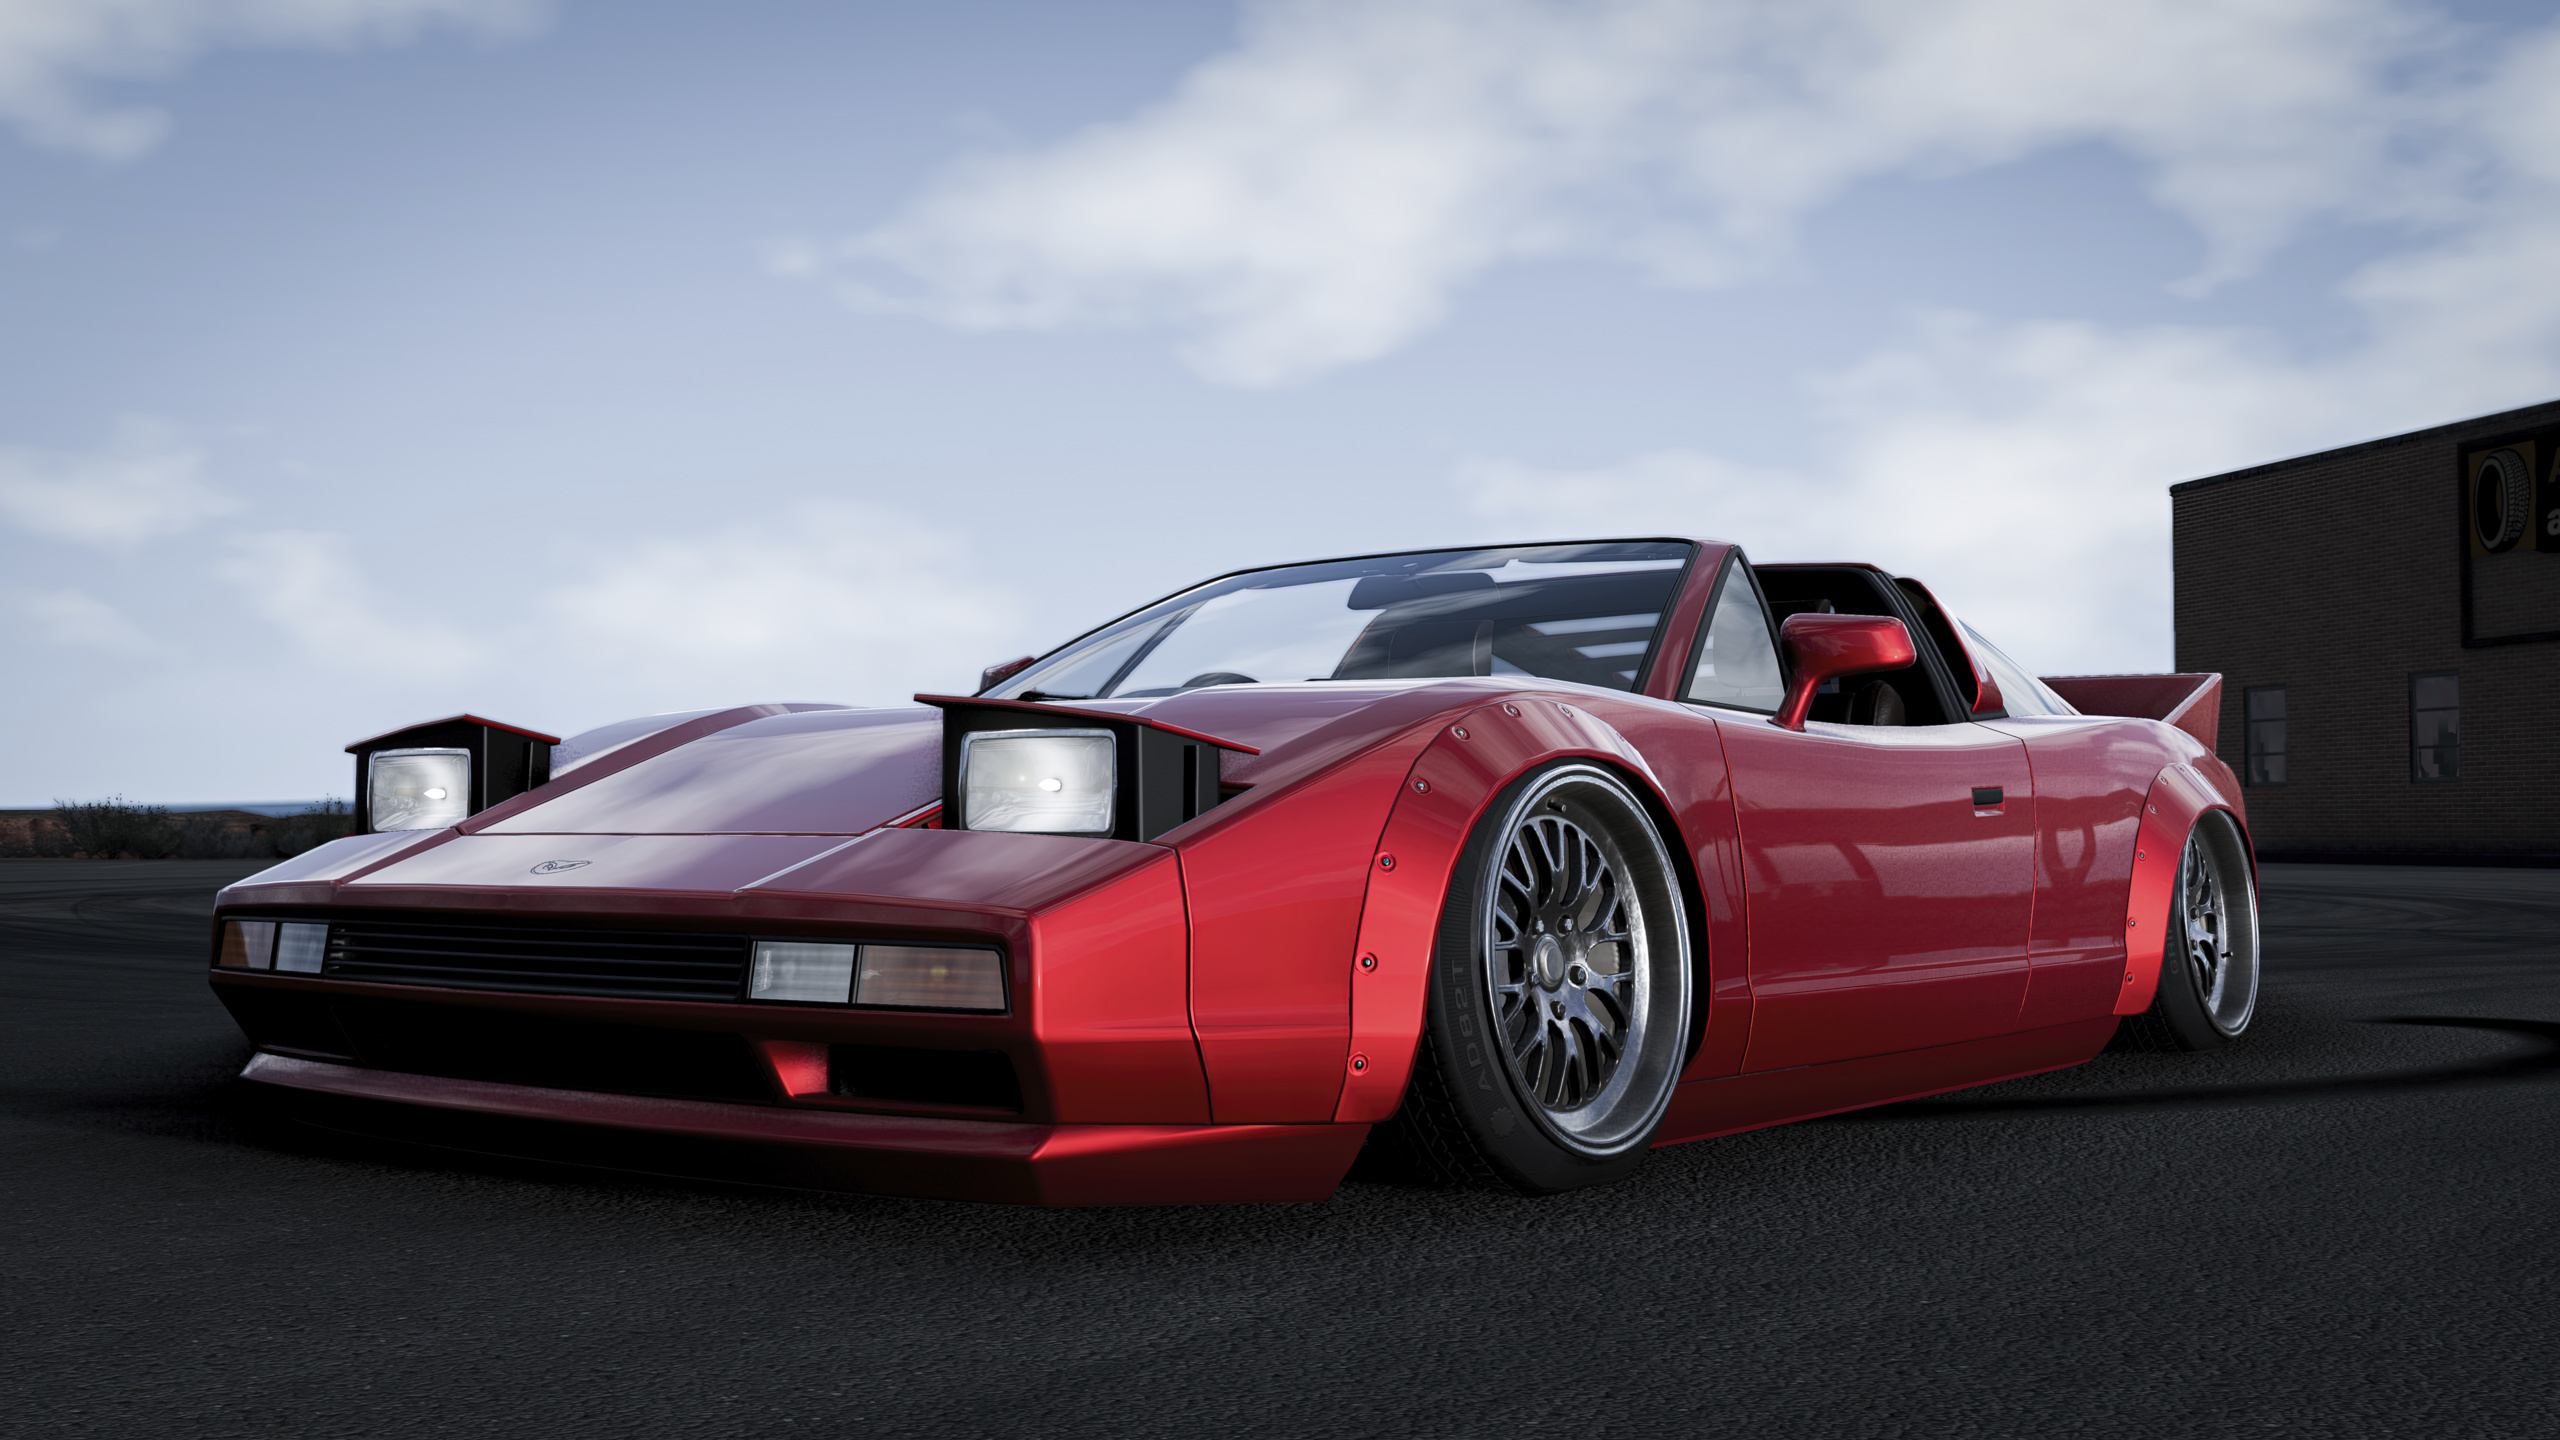 Video Game Art Car Stance Cars BeamNG Sky CGi Clouds Front Angle View Video Games 2560x1440